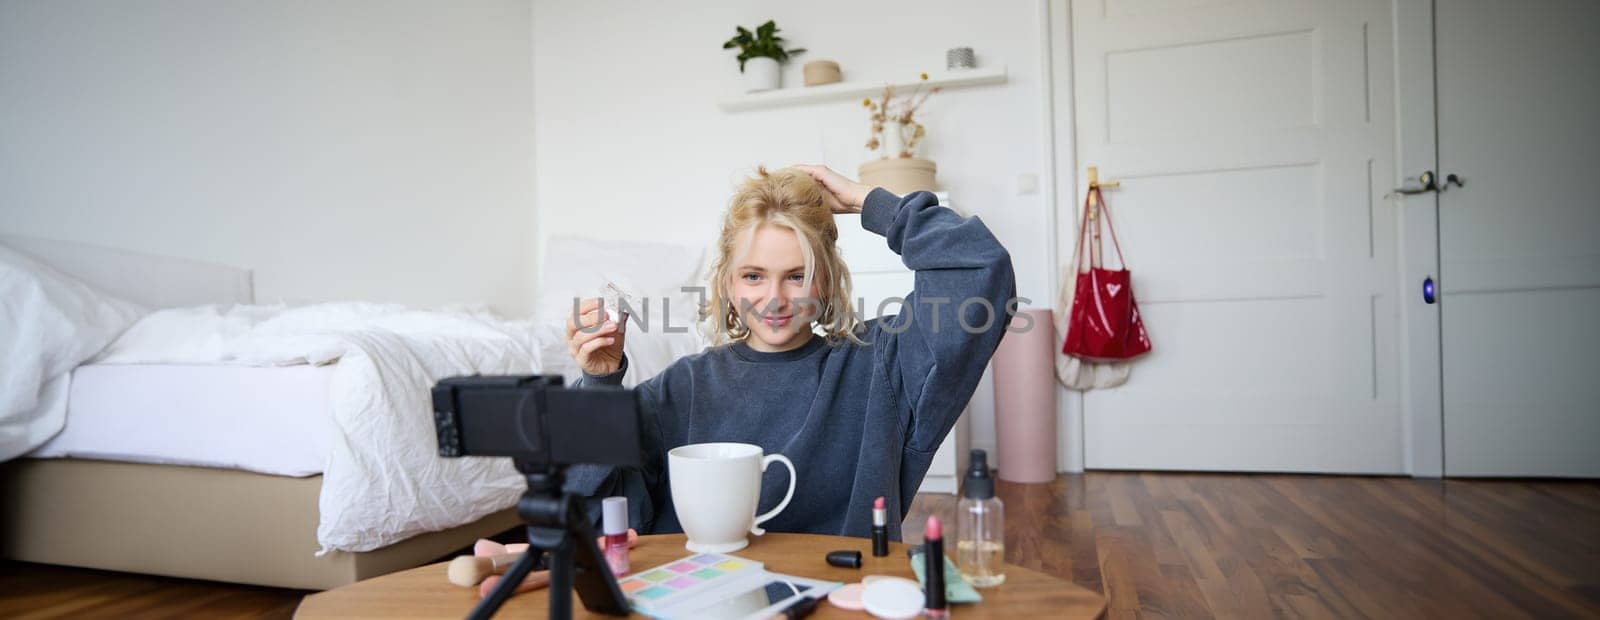 Portrait of stylish, smiling beautiful woman, recording lifestyle vlog, getting ready on camera, showing how to make her hairstyle for social media followers, vlogging from her room.